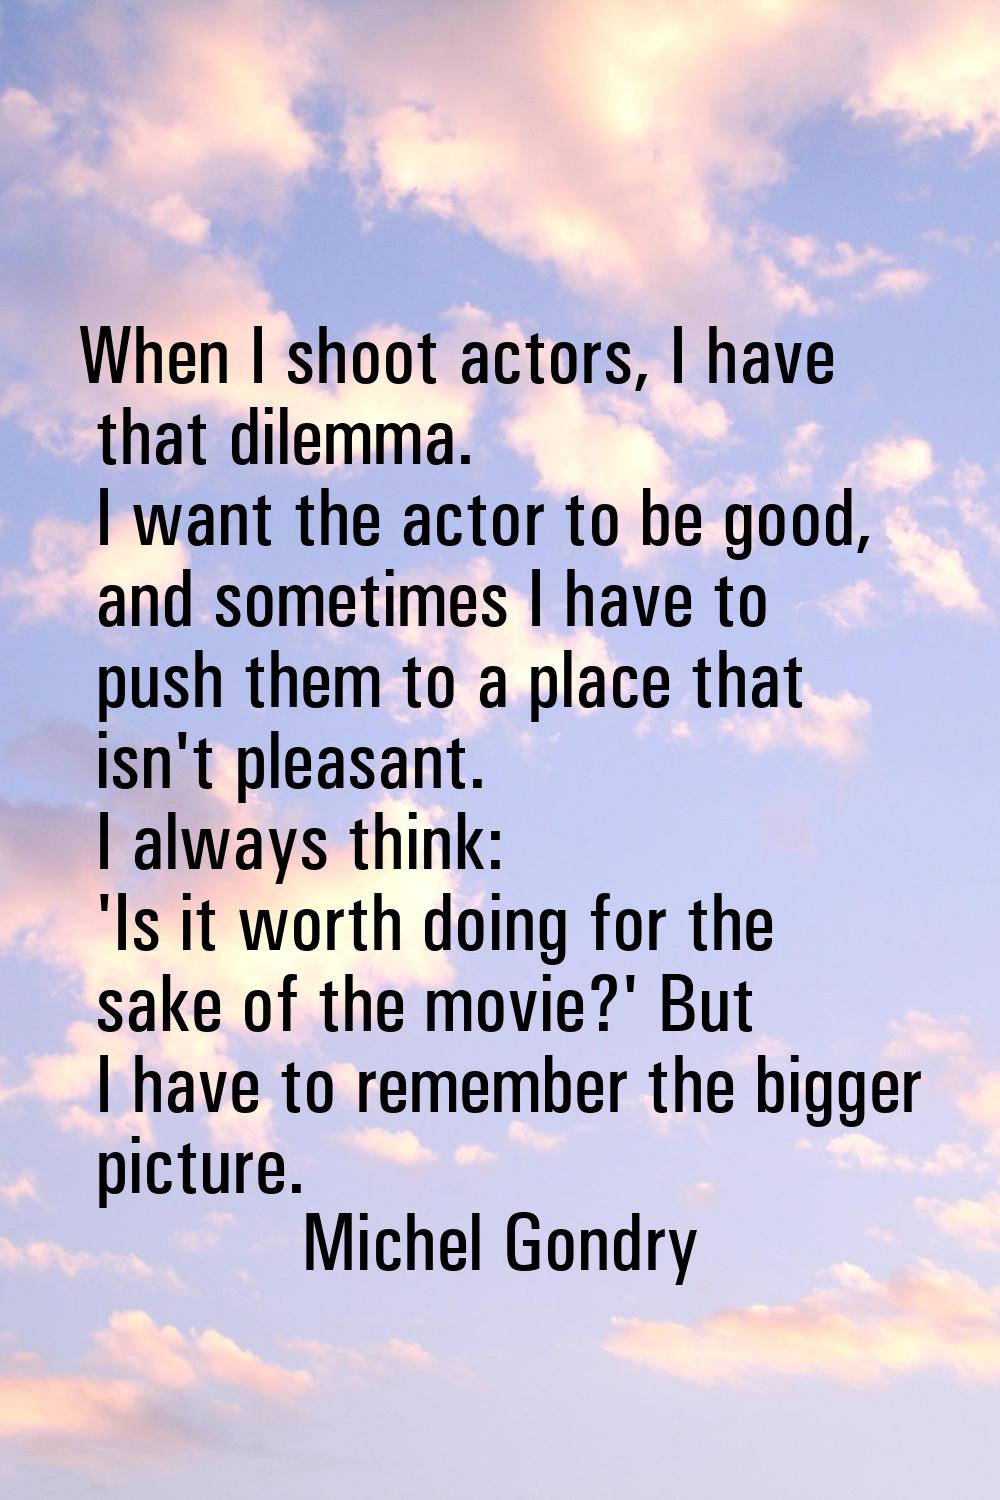 When I shoot actors, I have that dilemma. I want the actor to be good, and sometimes I have to push